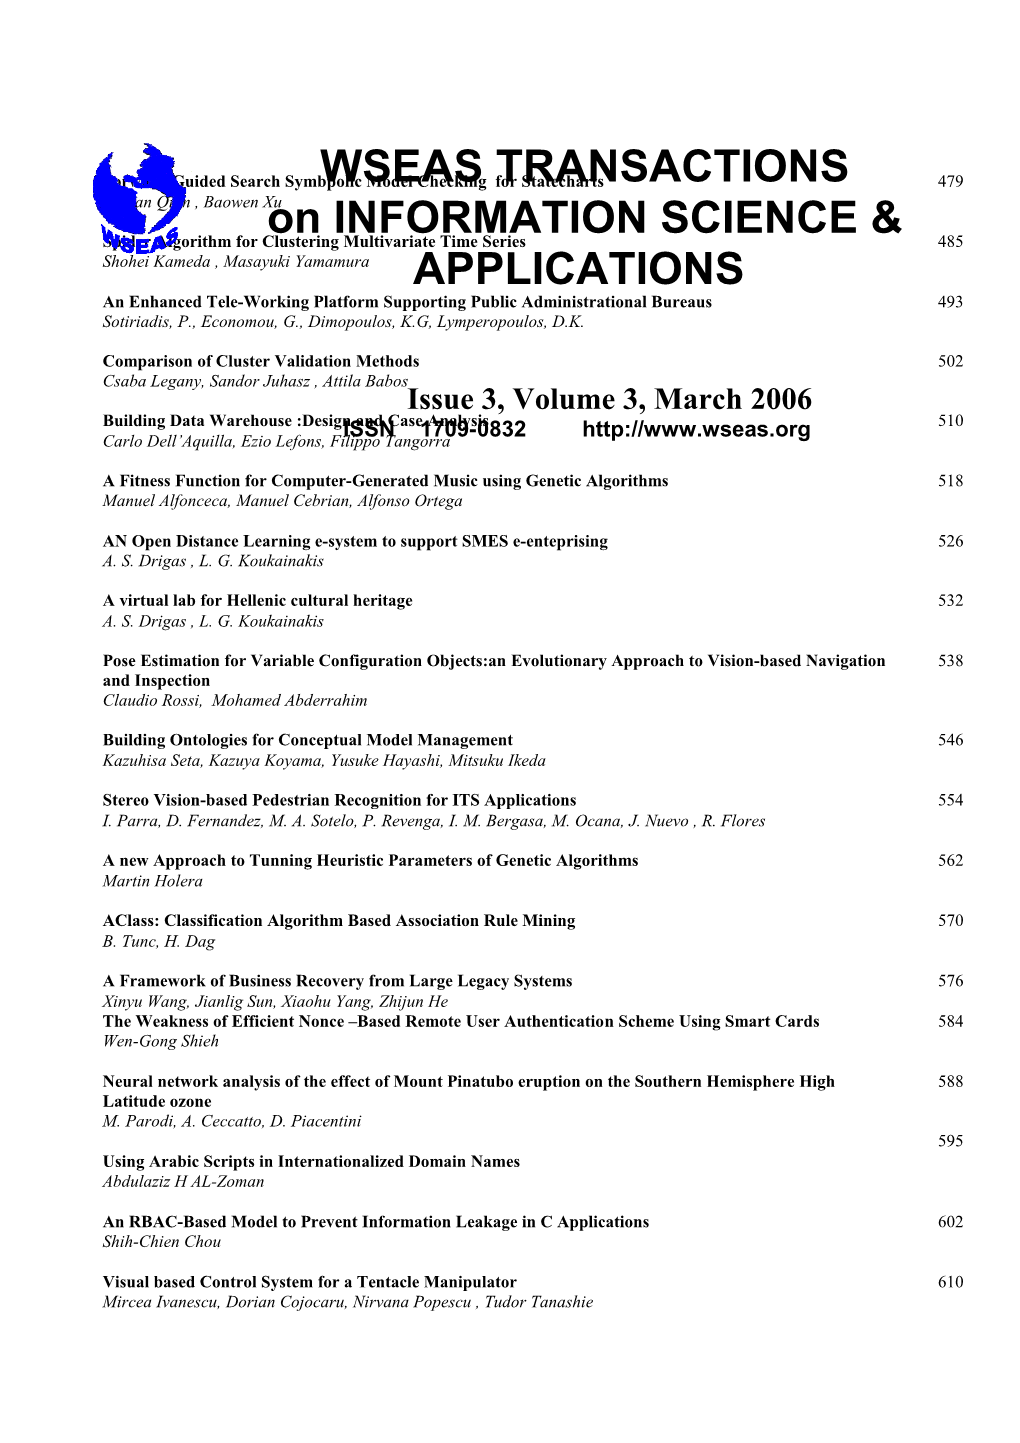 WSEAS Trans. on INFORMATION SCIENCE & APPLICATIONS, March 2006